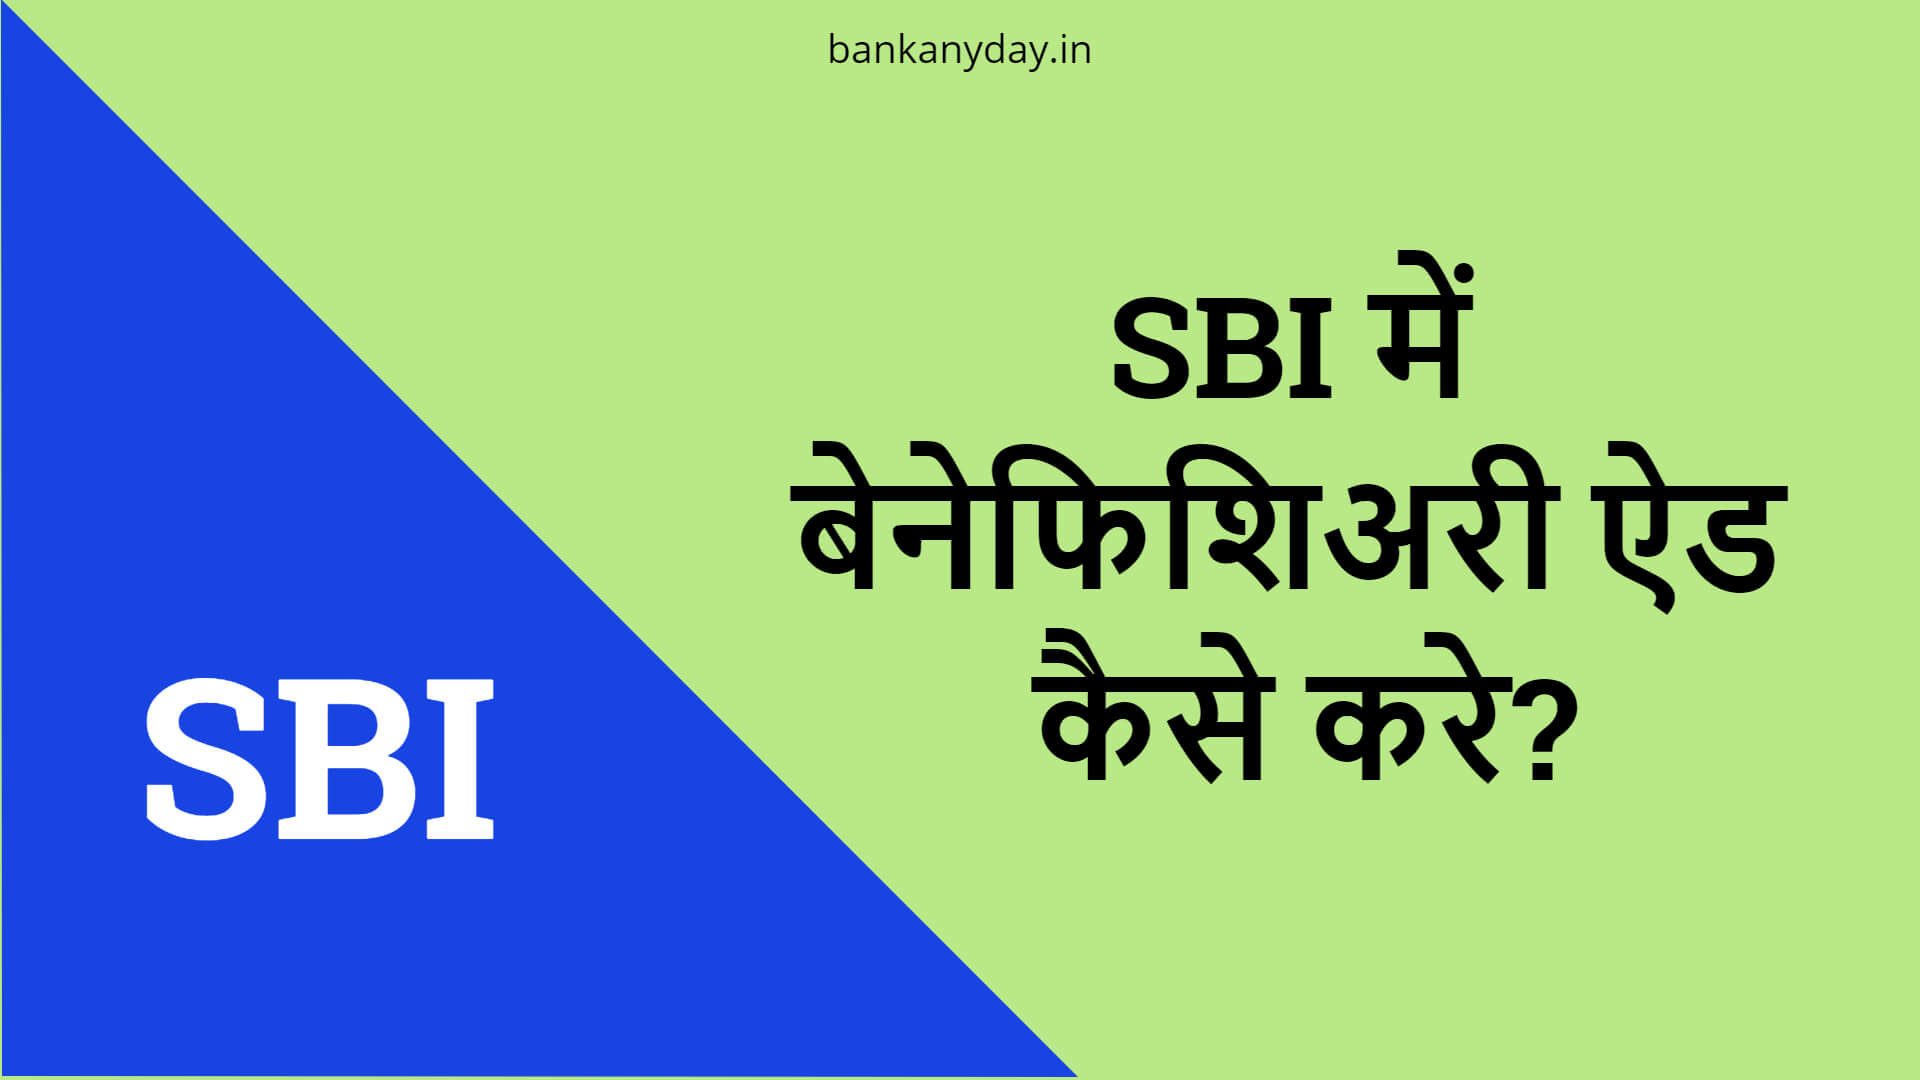 SBI me beneficiary kaise add kare